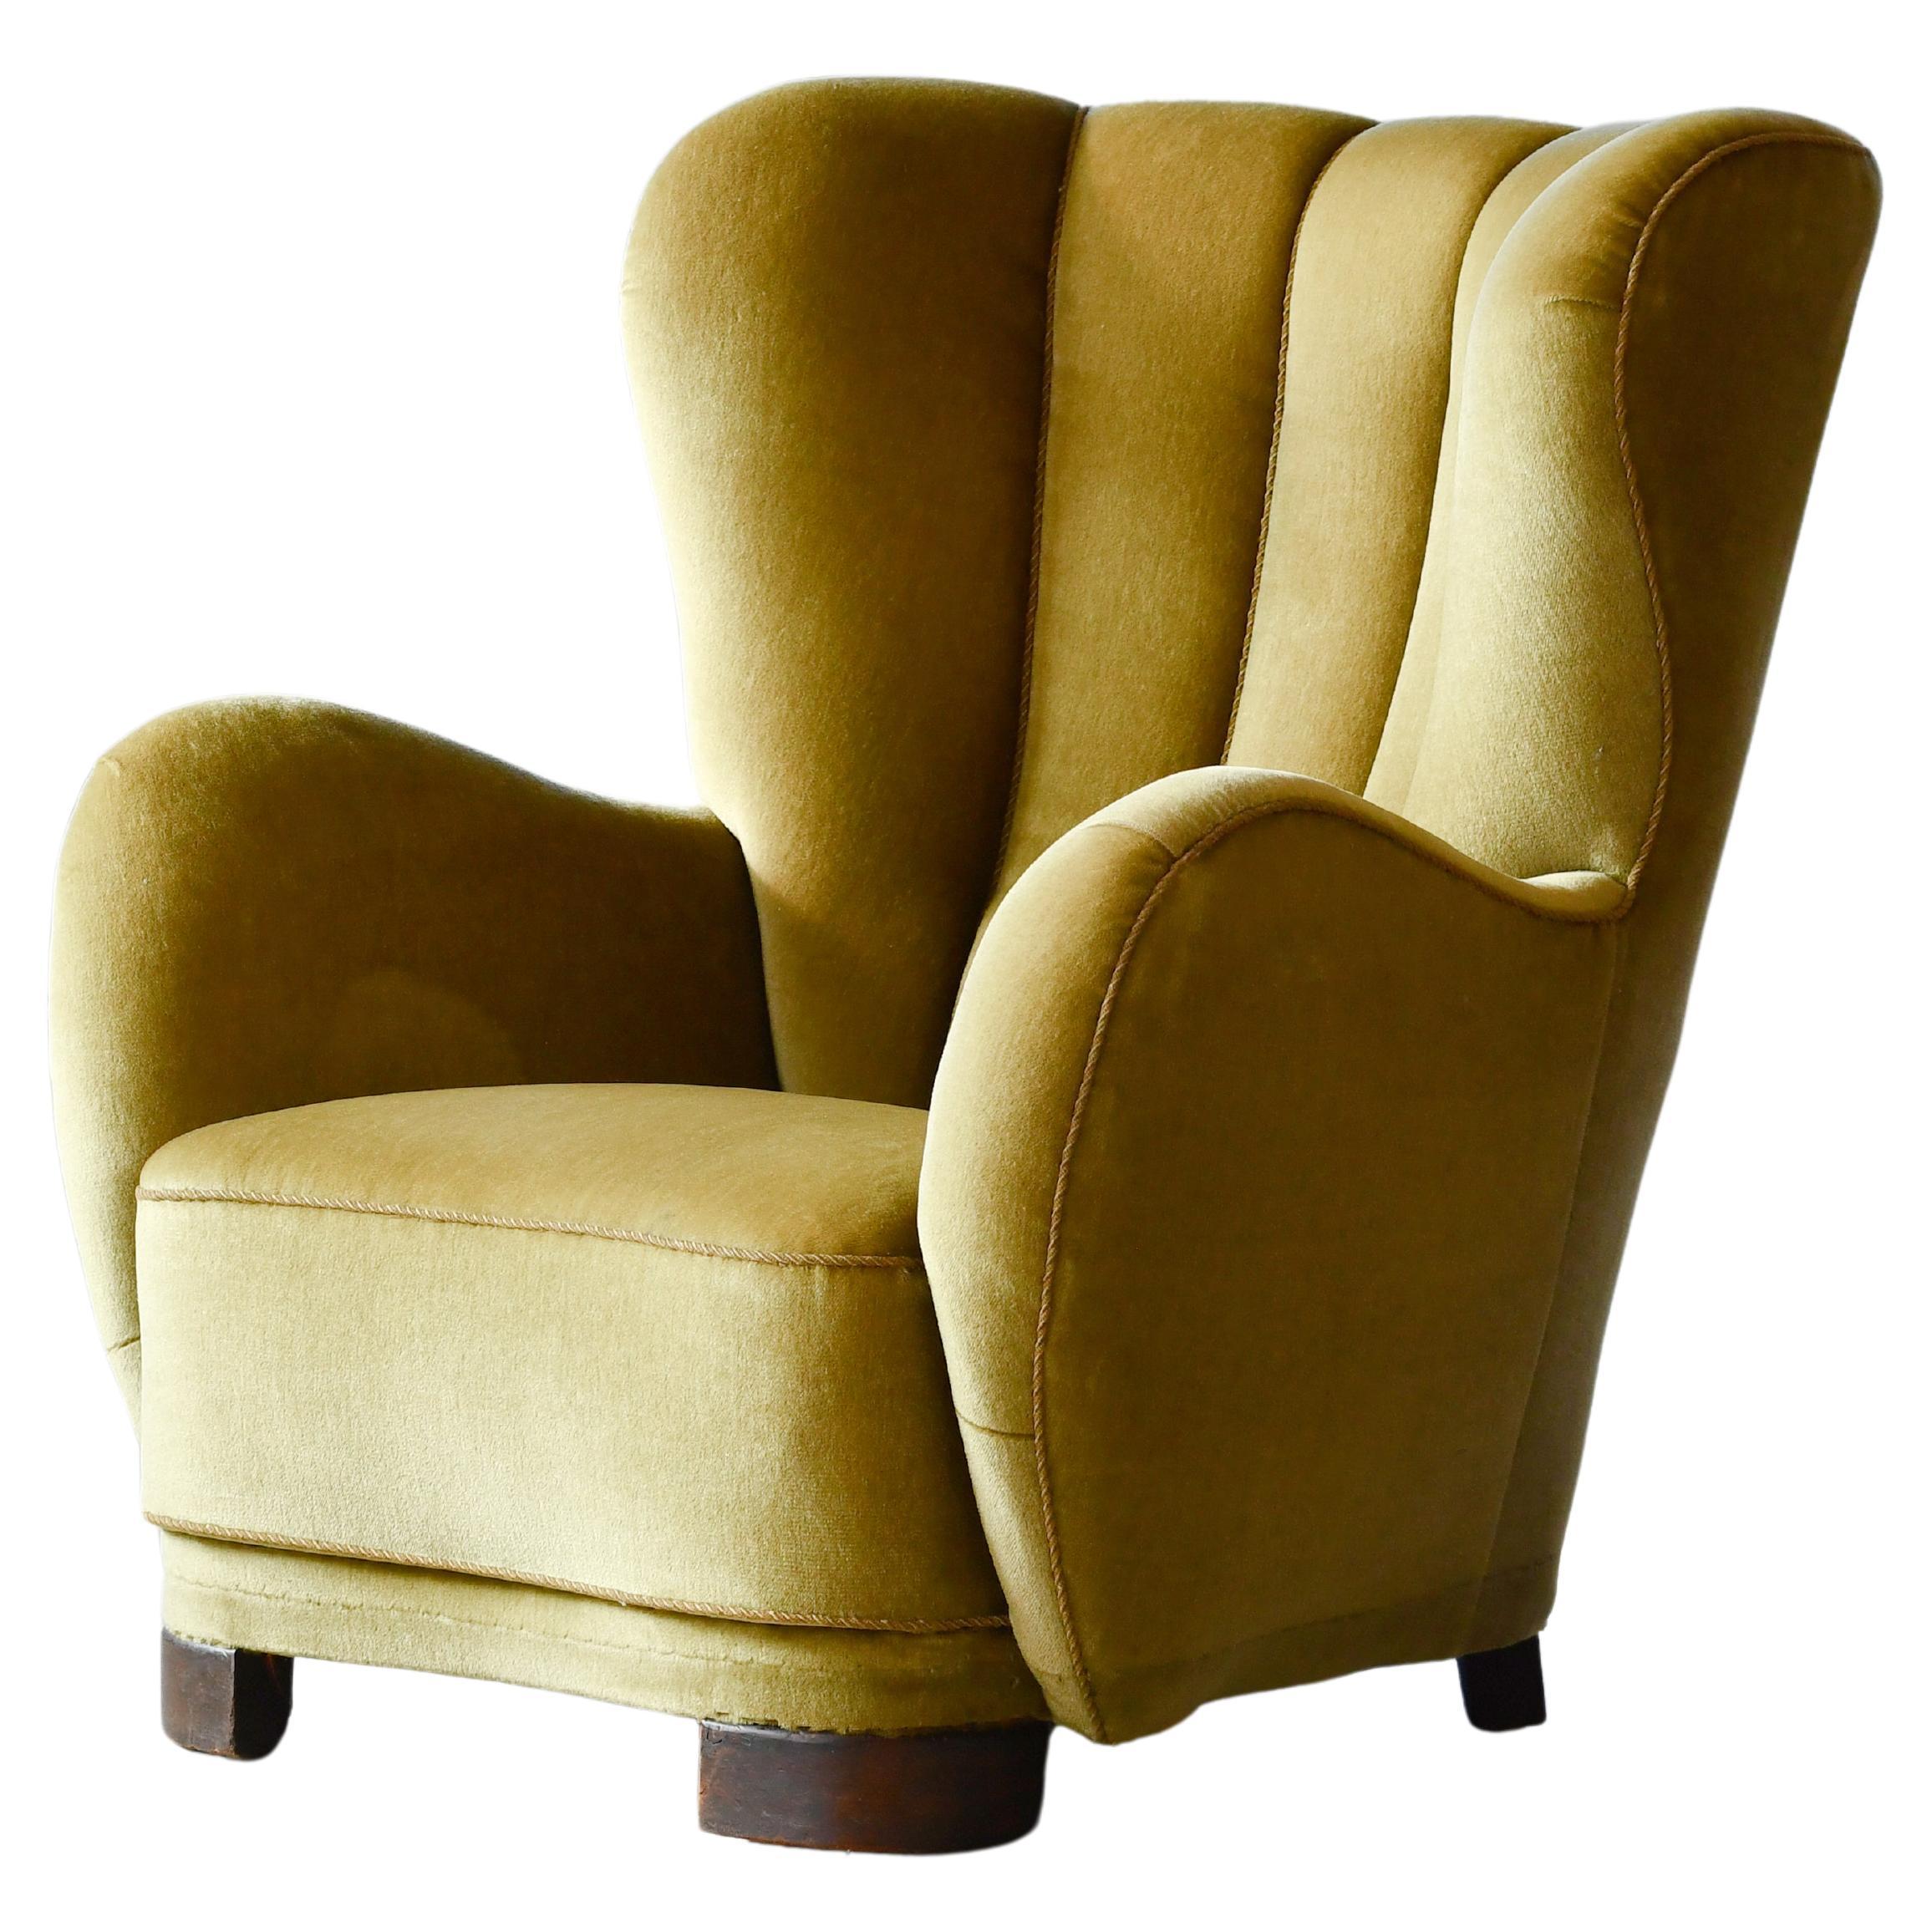 Mogens Lassen Style Danish 1940s Channel Back Lounge Chair in Mohair Fabric For Sale